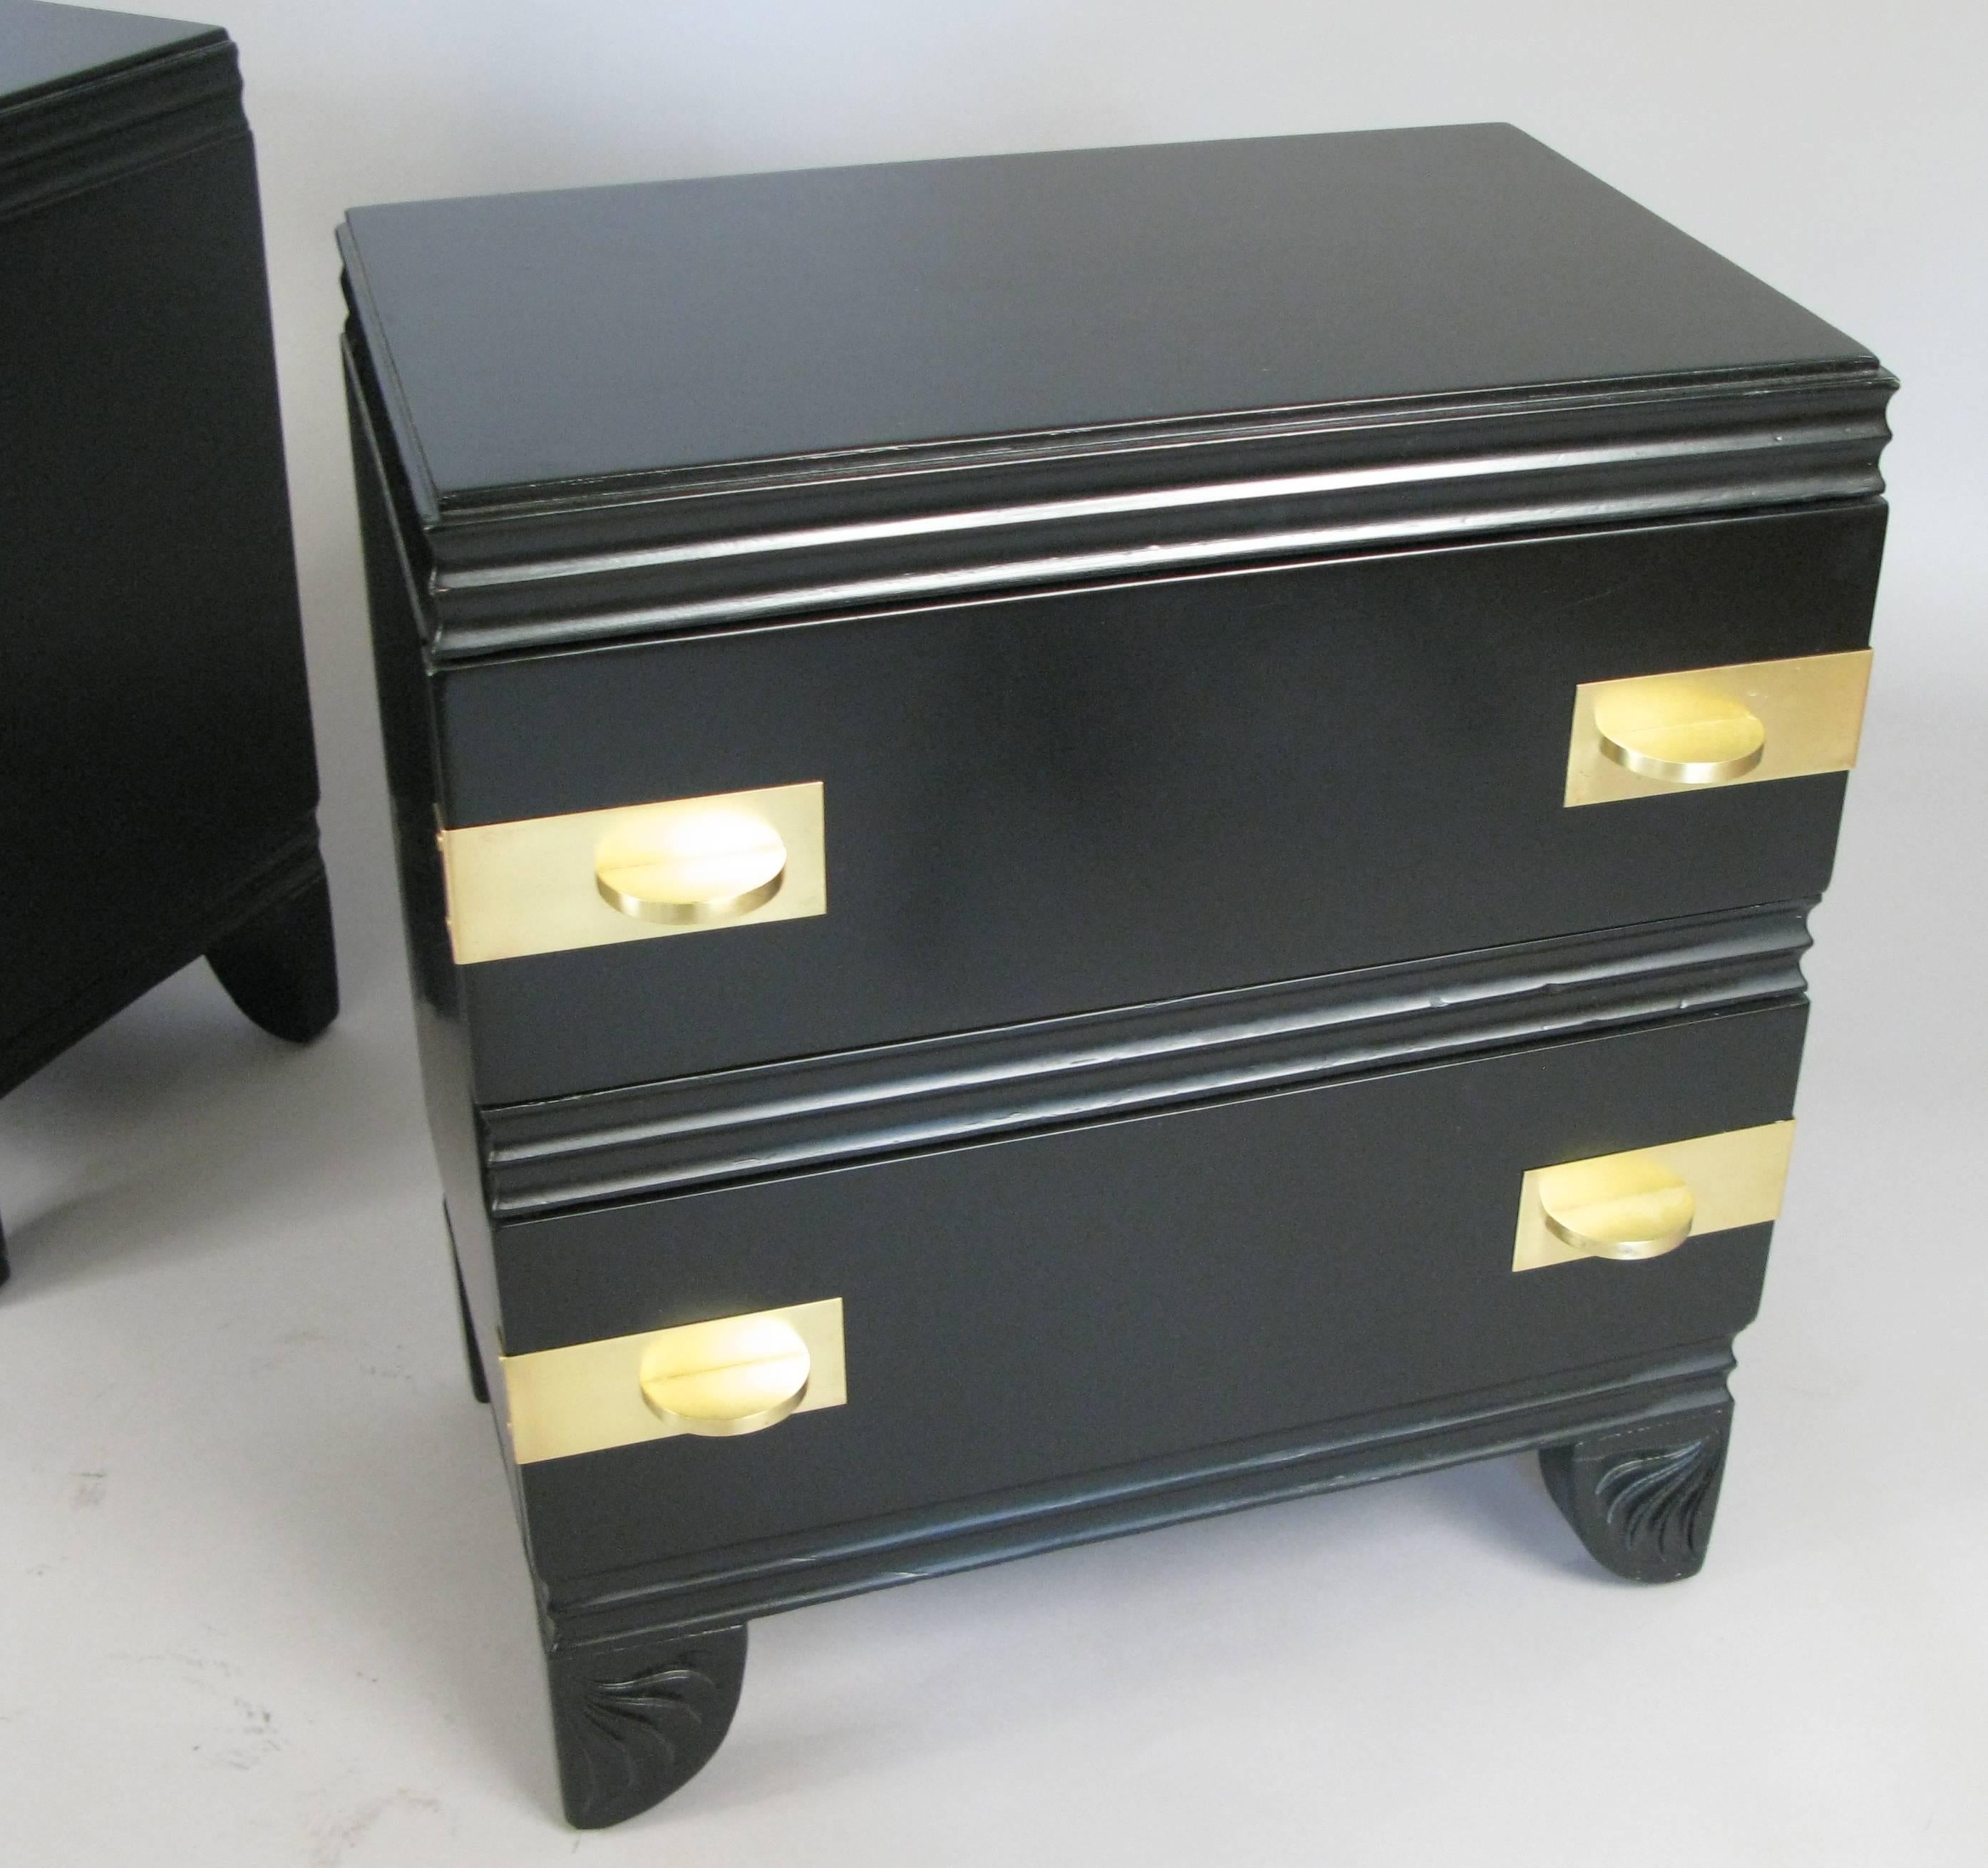 American Pair of 1950s Lacquer and Brass Nightstands by John Stuart